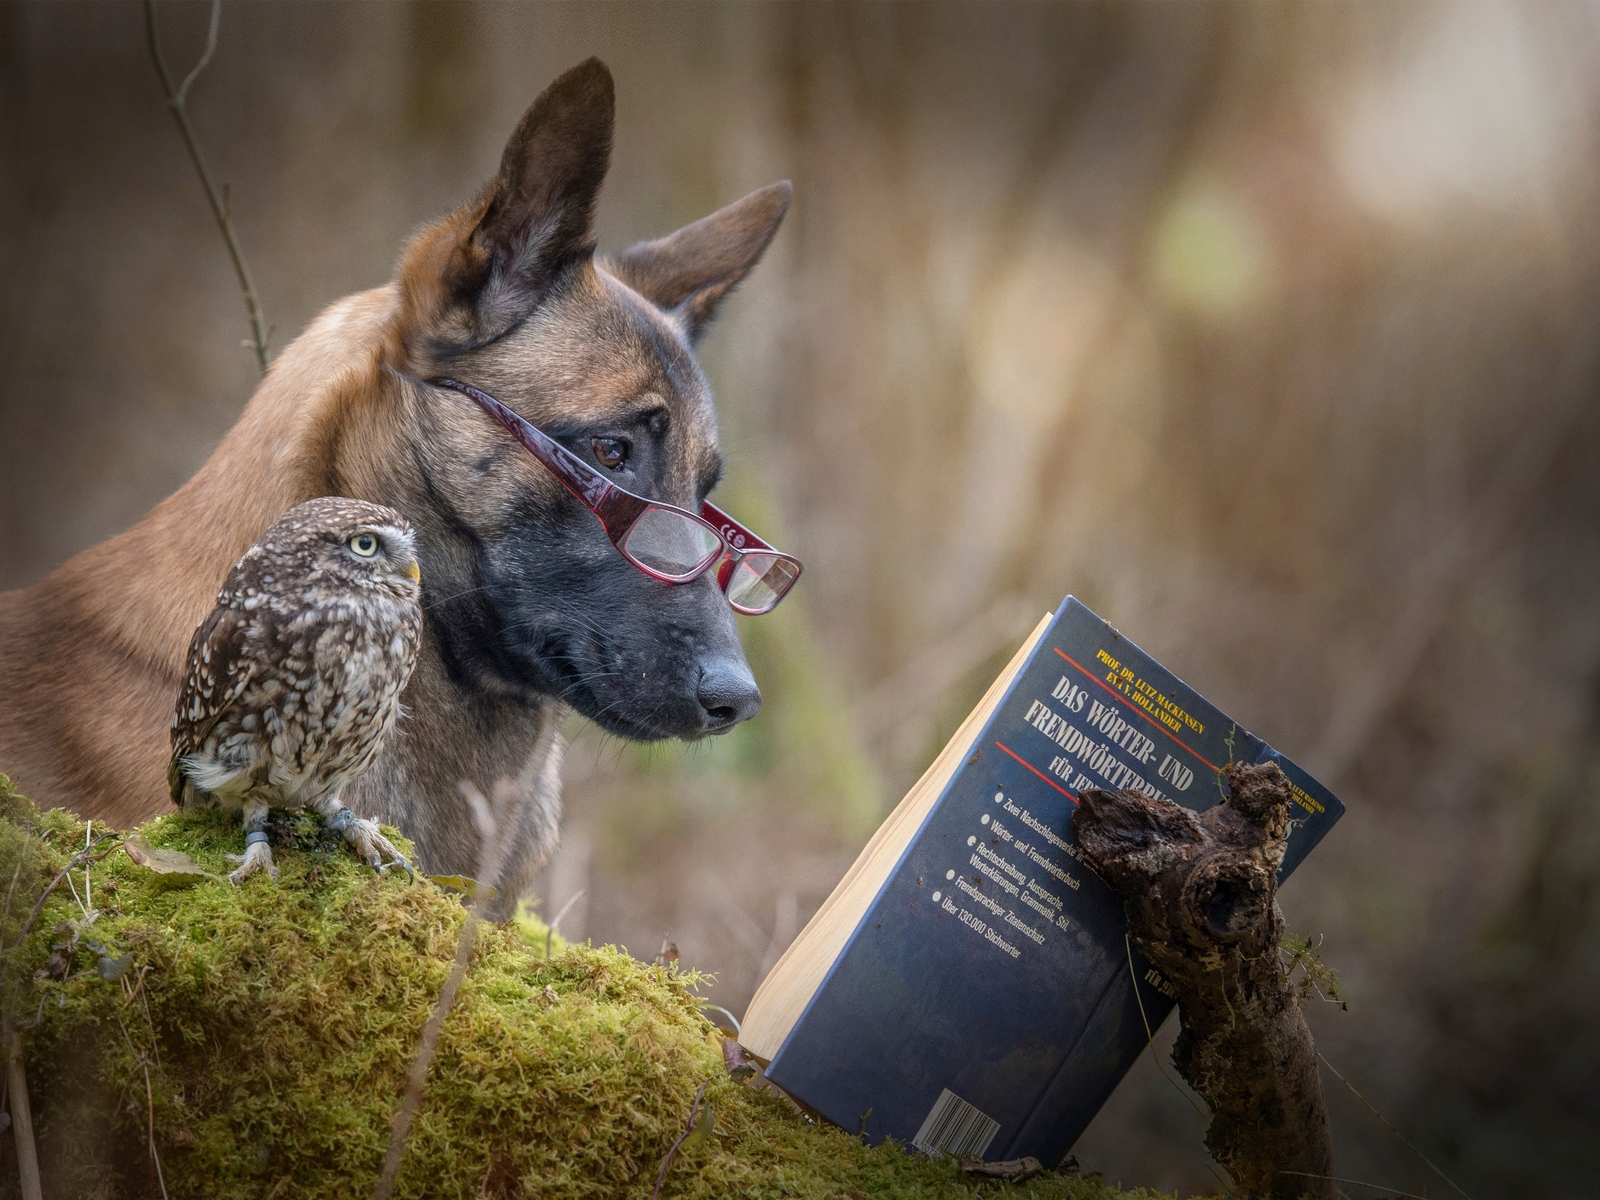 Dog and Owl Reading a Book for 1600 x 1200 resolution